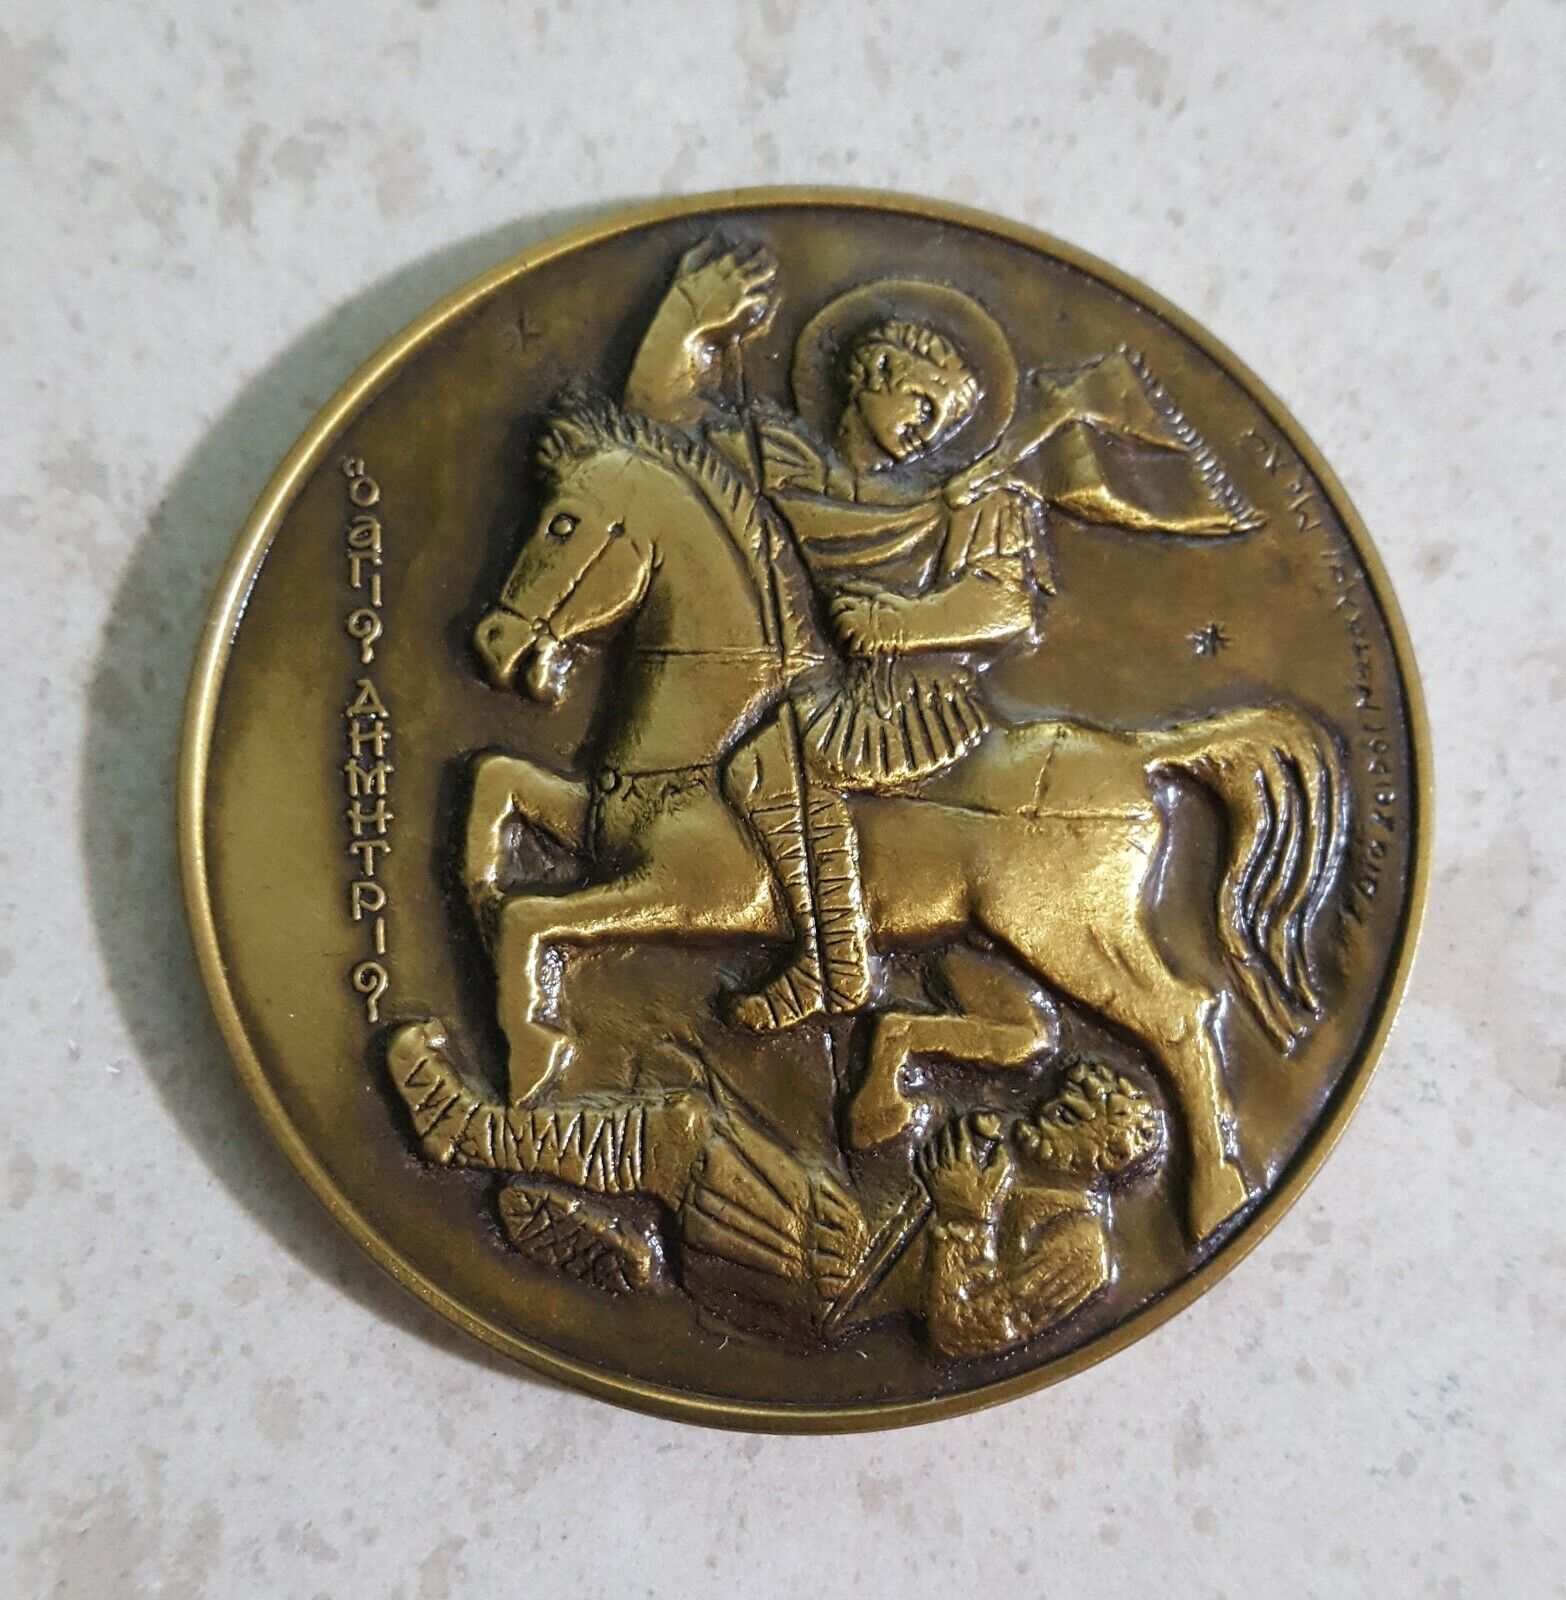 Greece greek commemorative military (army) medal for the War Museum Thessaloniki